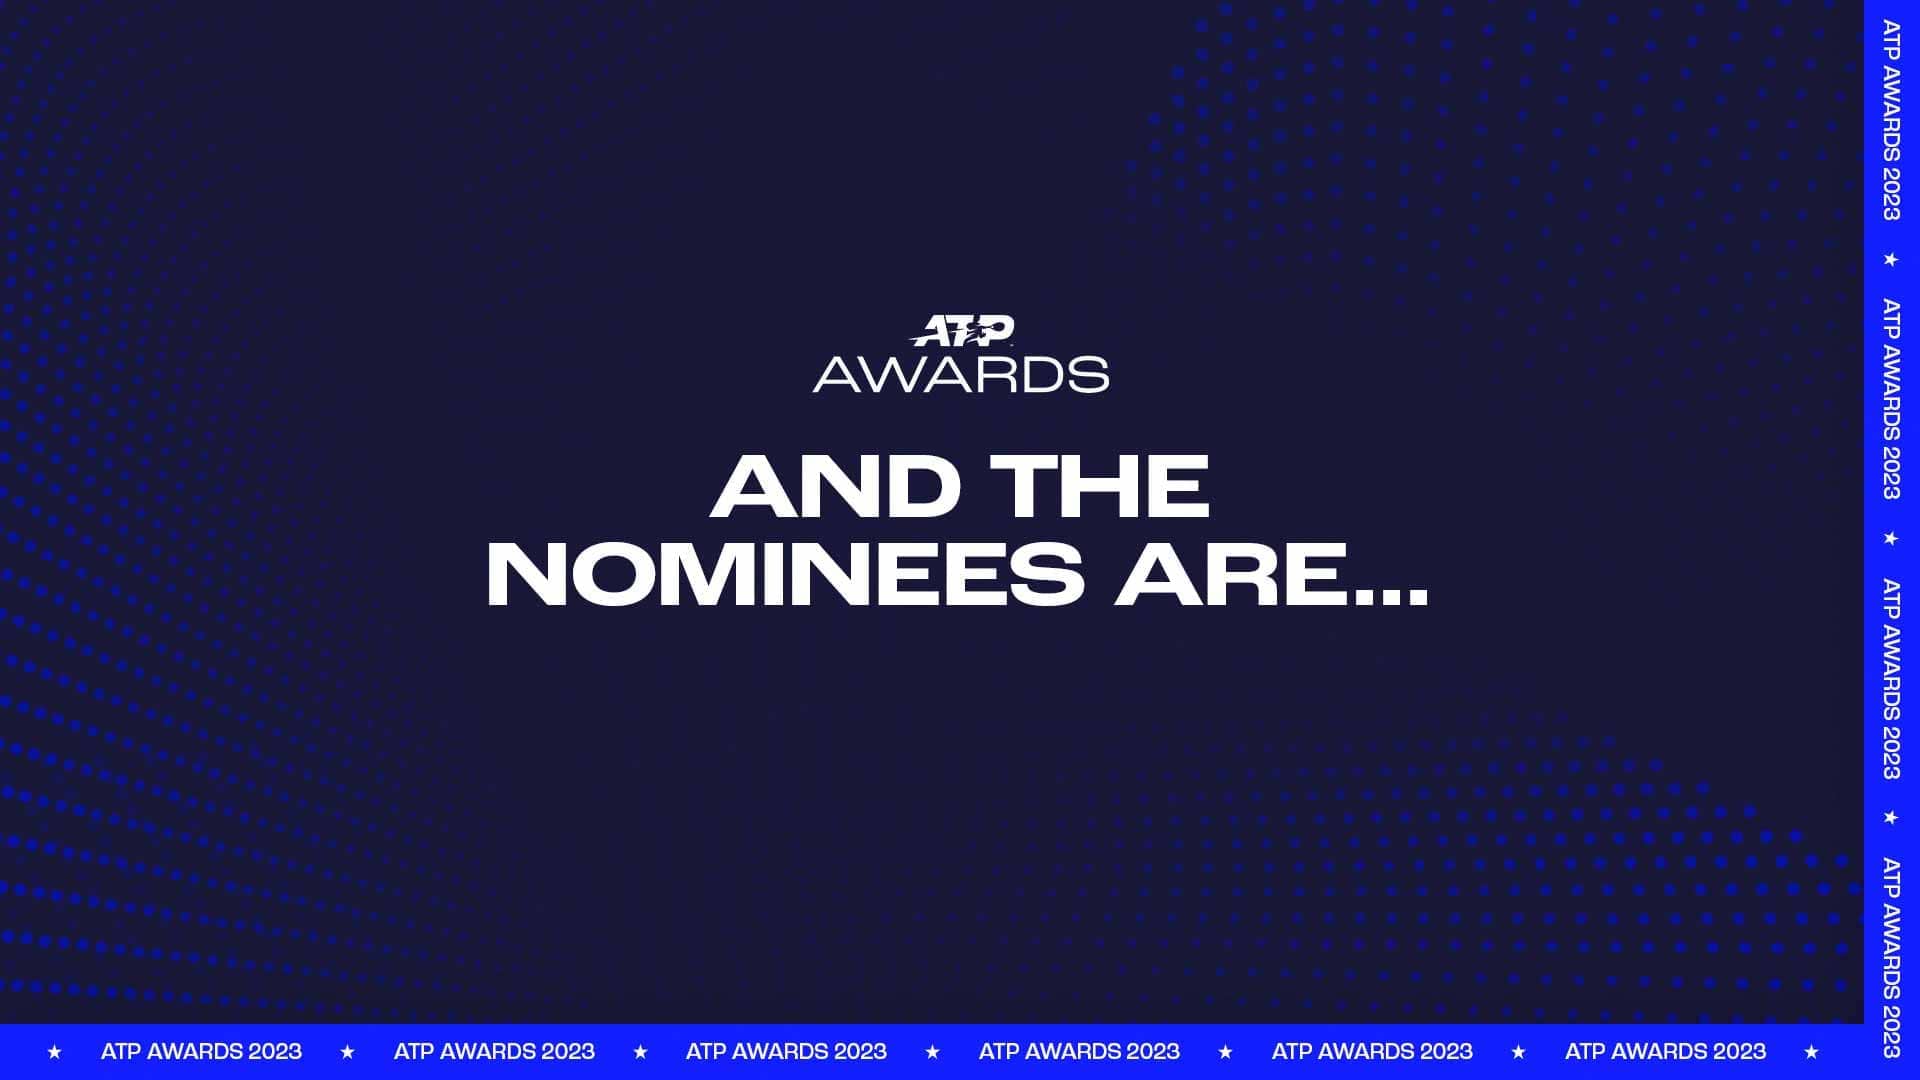 The 2023 ATP Awards Nominees Are…